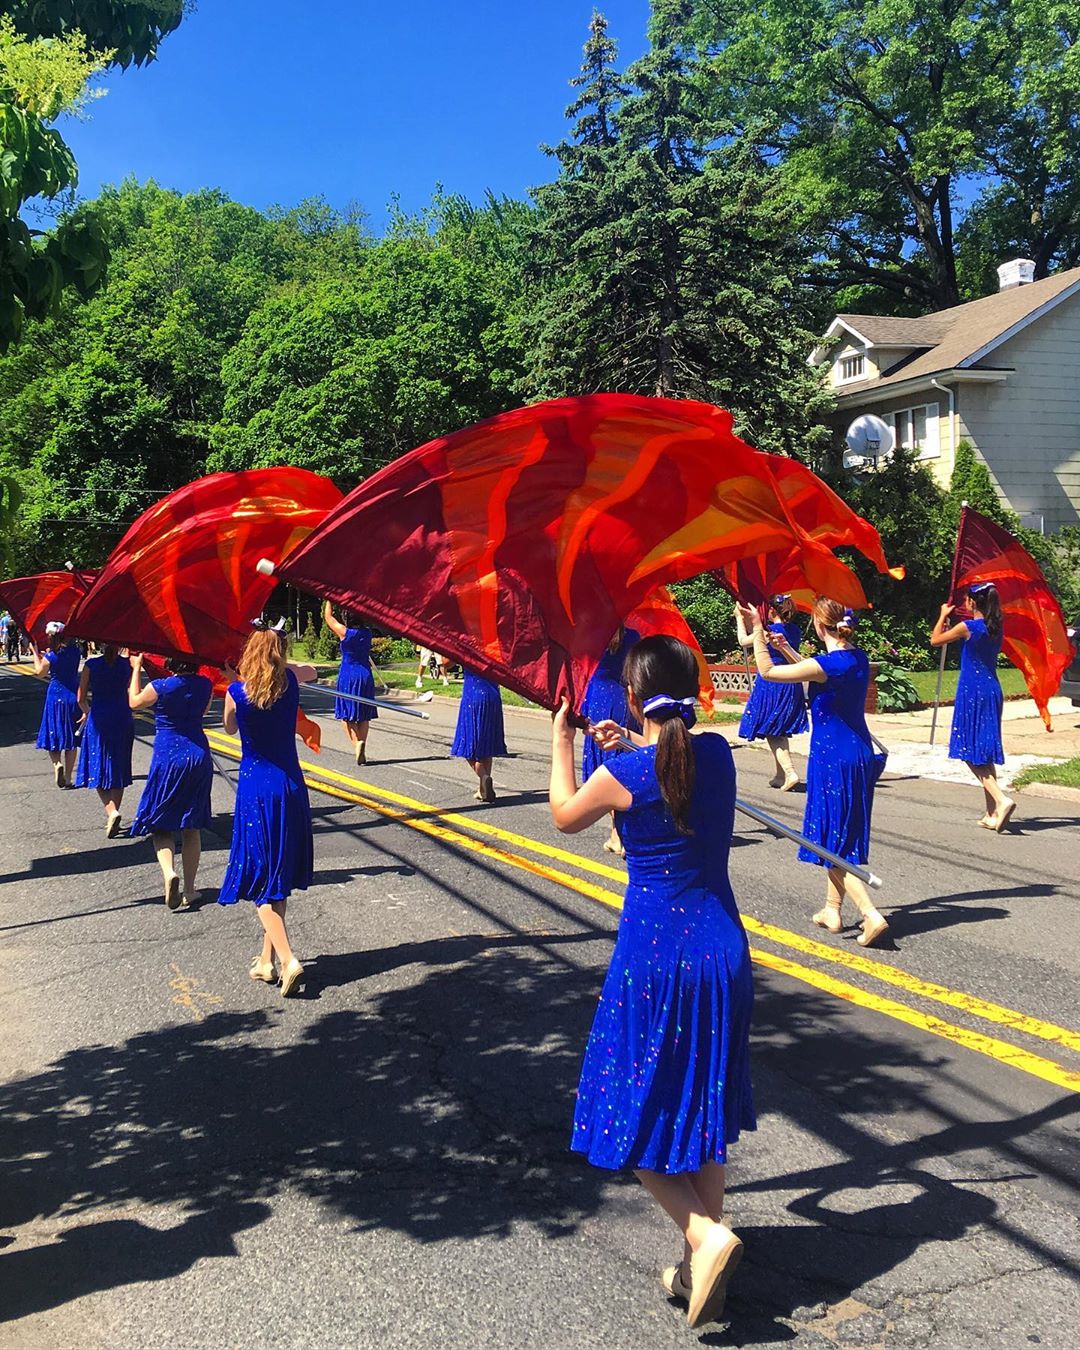 Girls waving red flags in parade. Photo by Instagram user @cap_one60